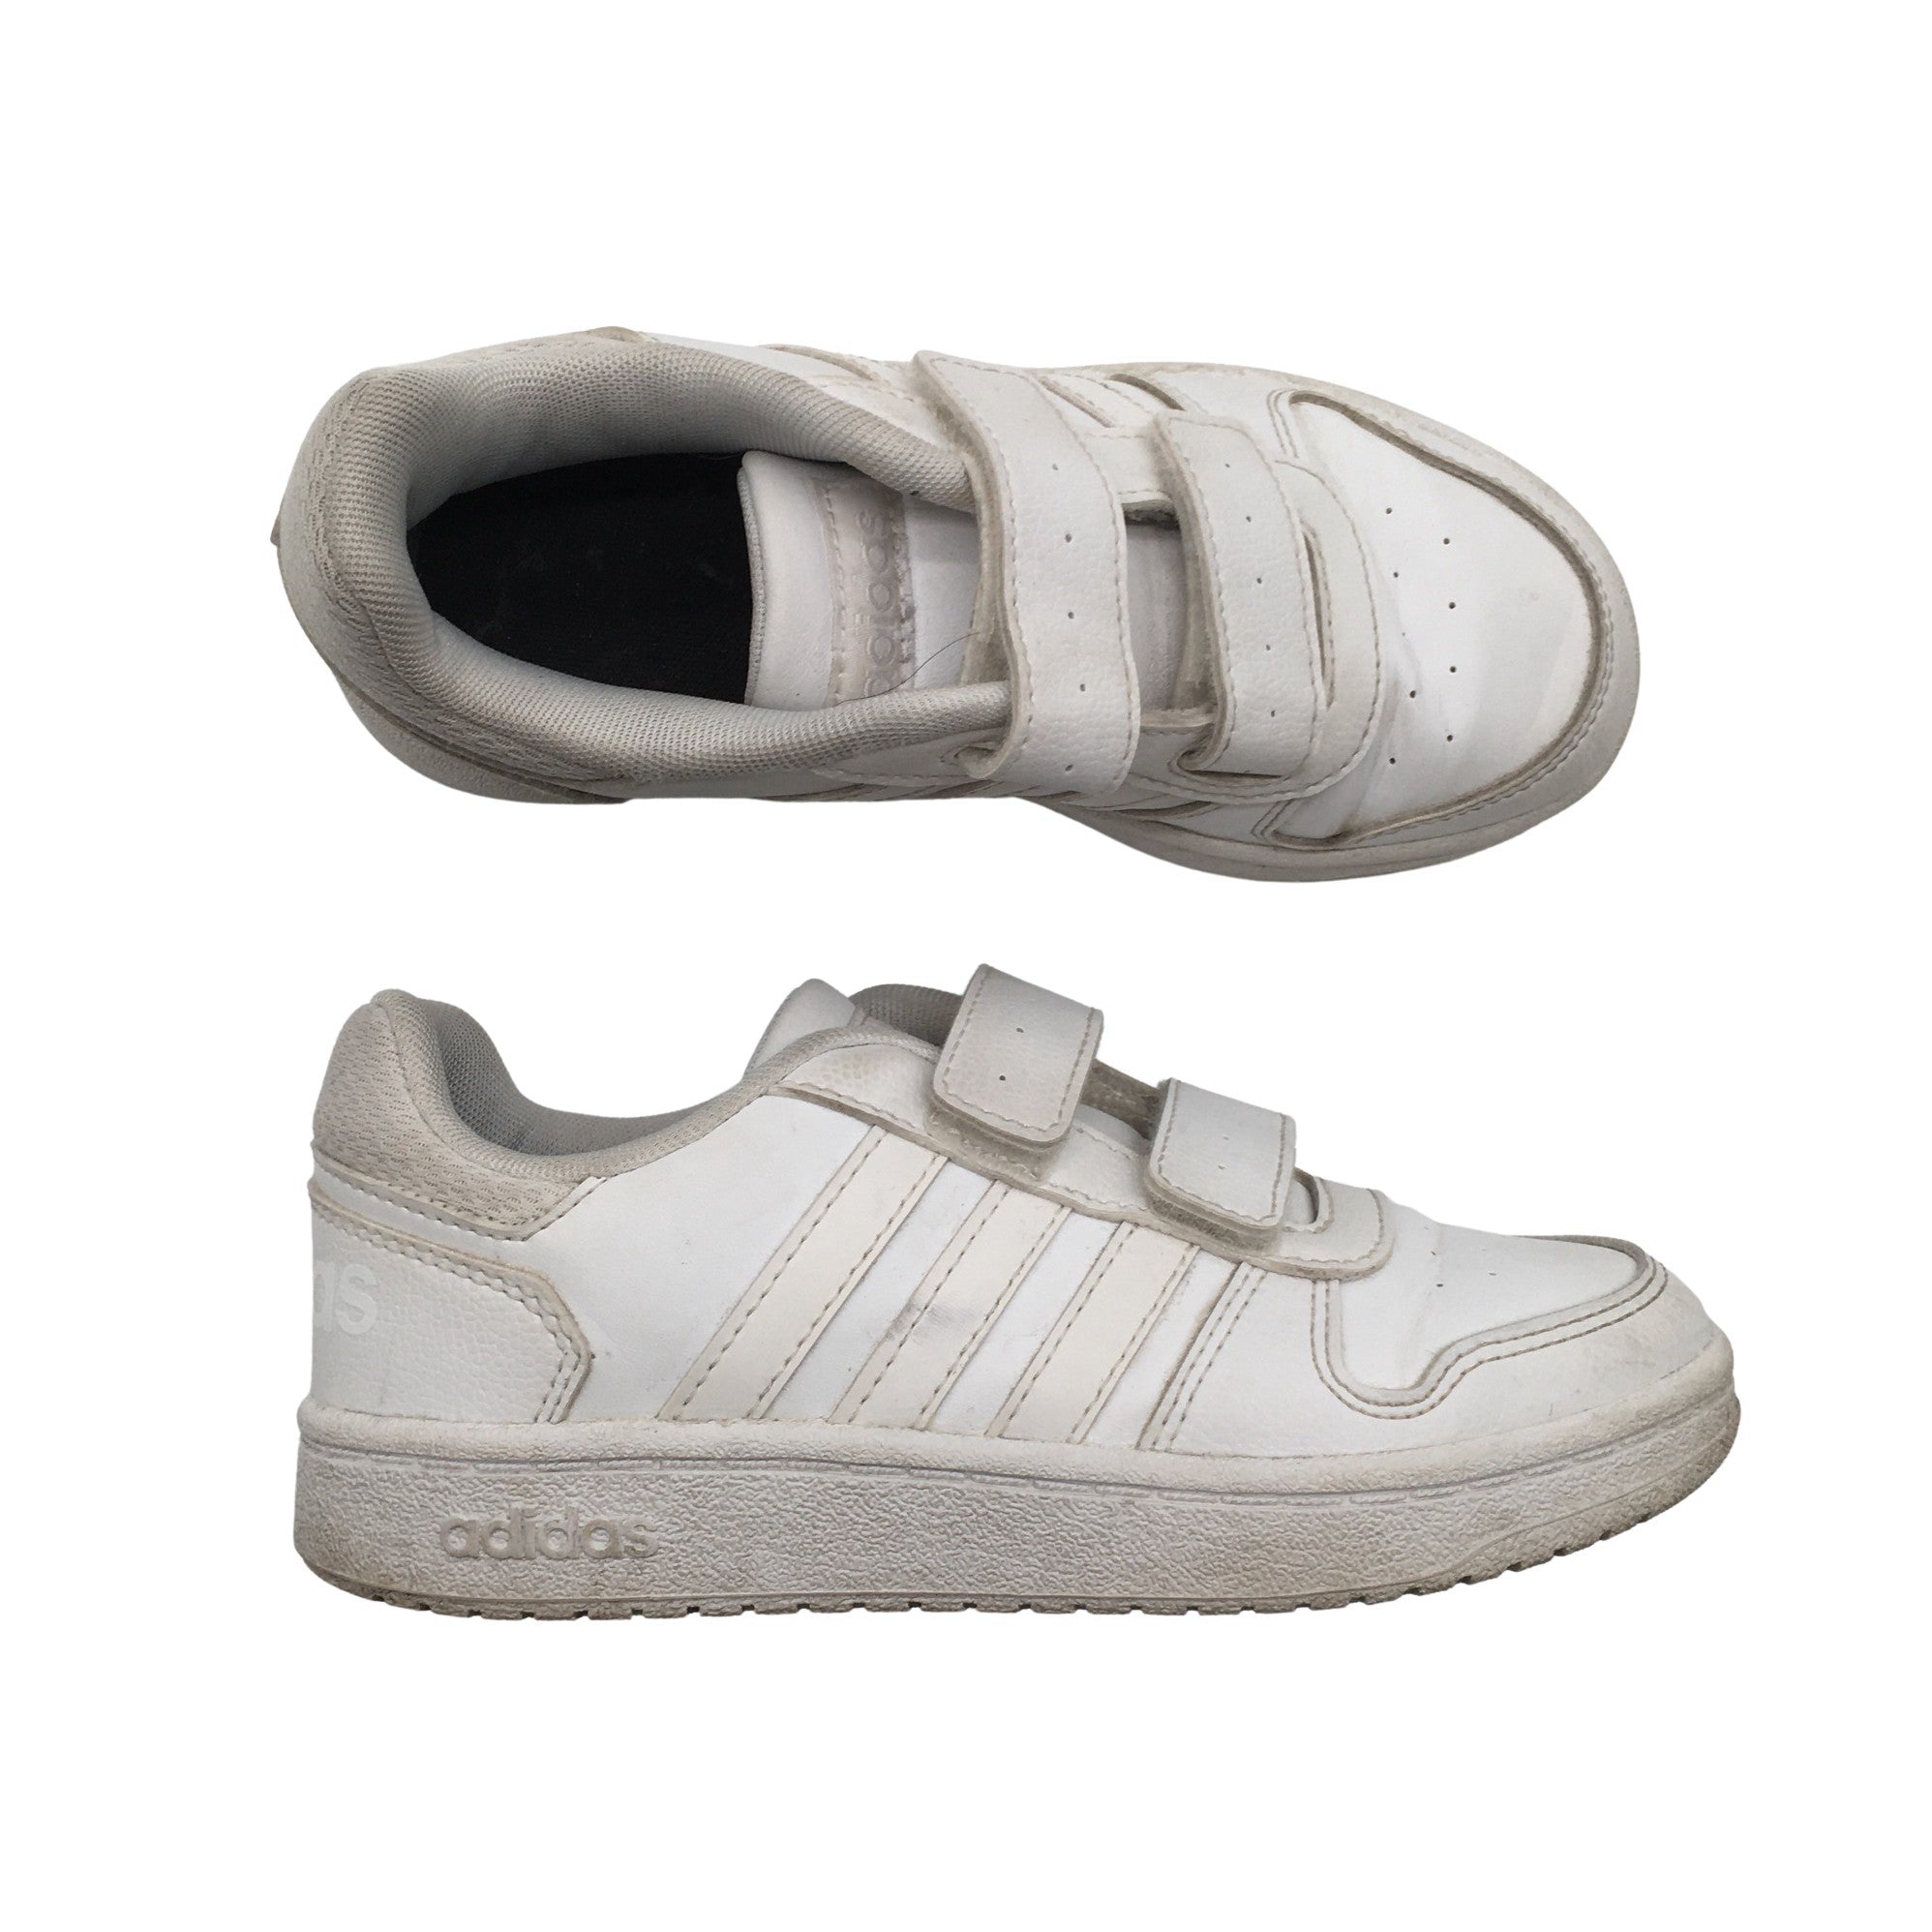 Unisex Adidas sneakers, size 33 | Emmy